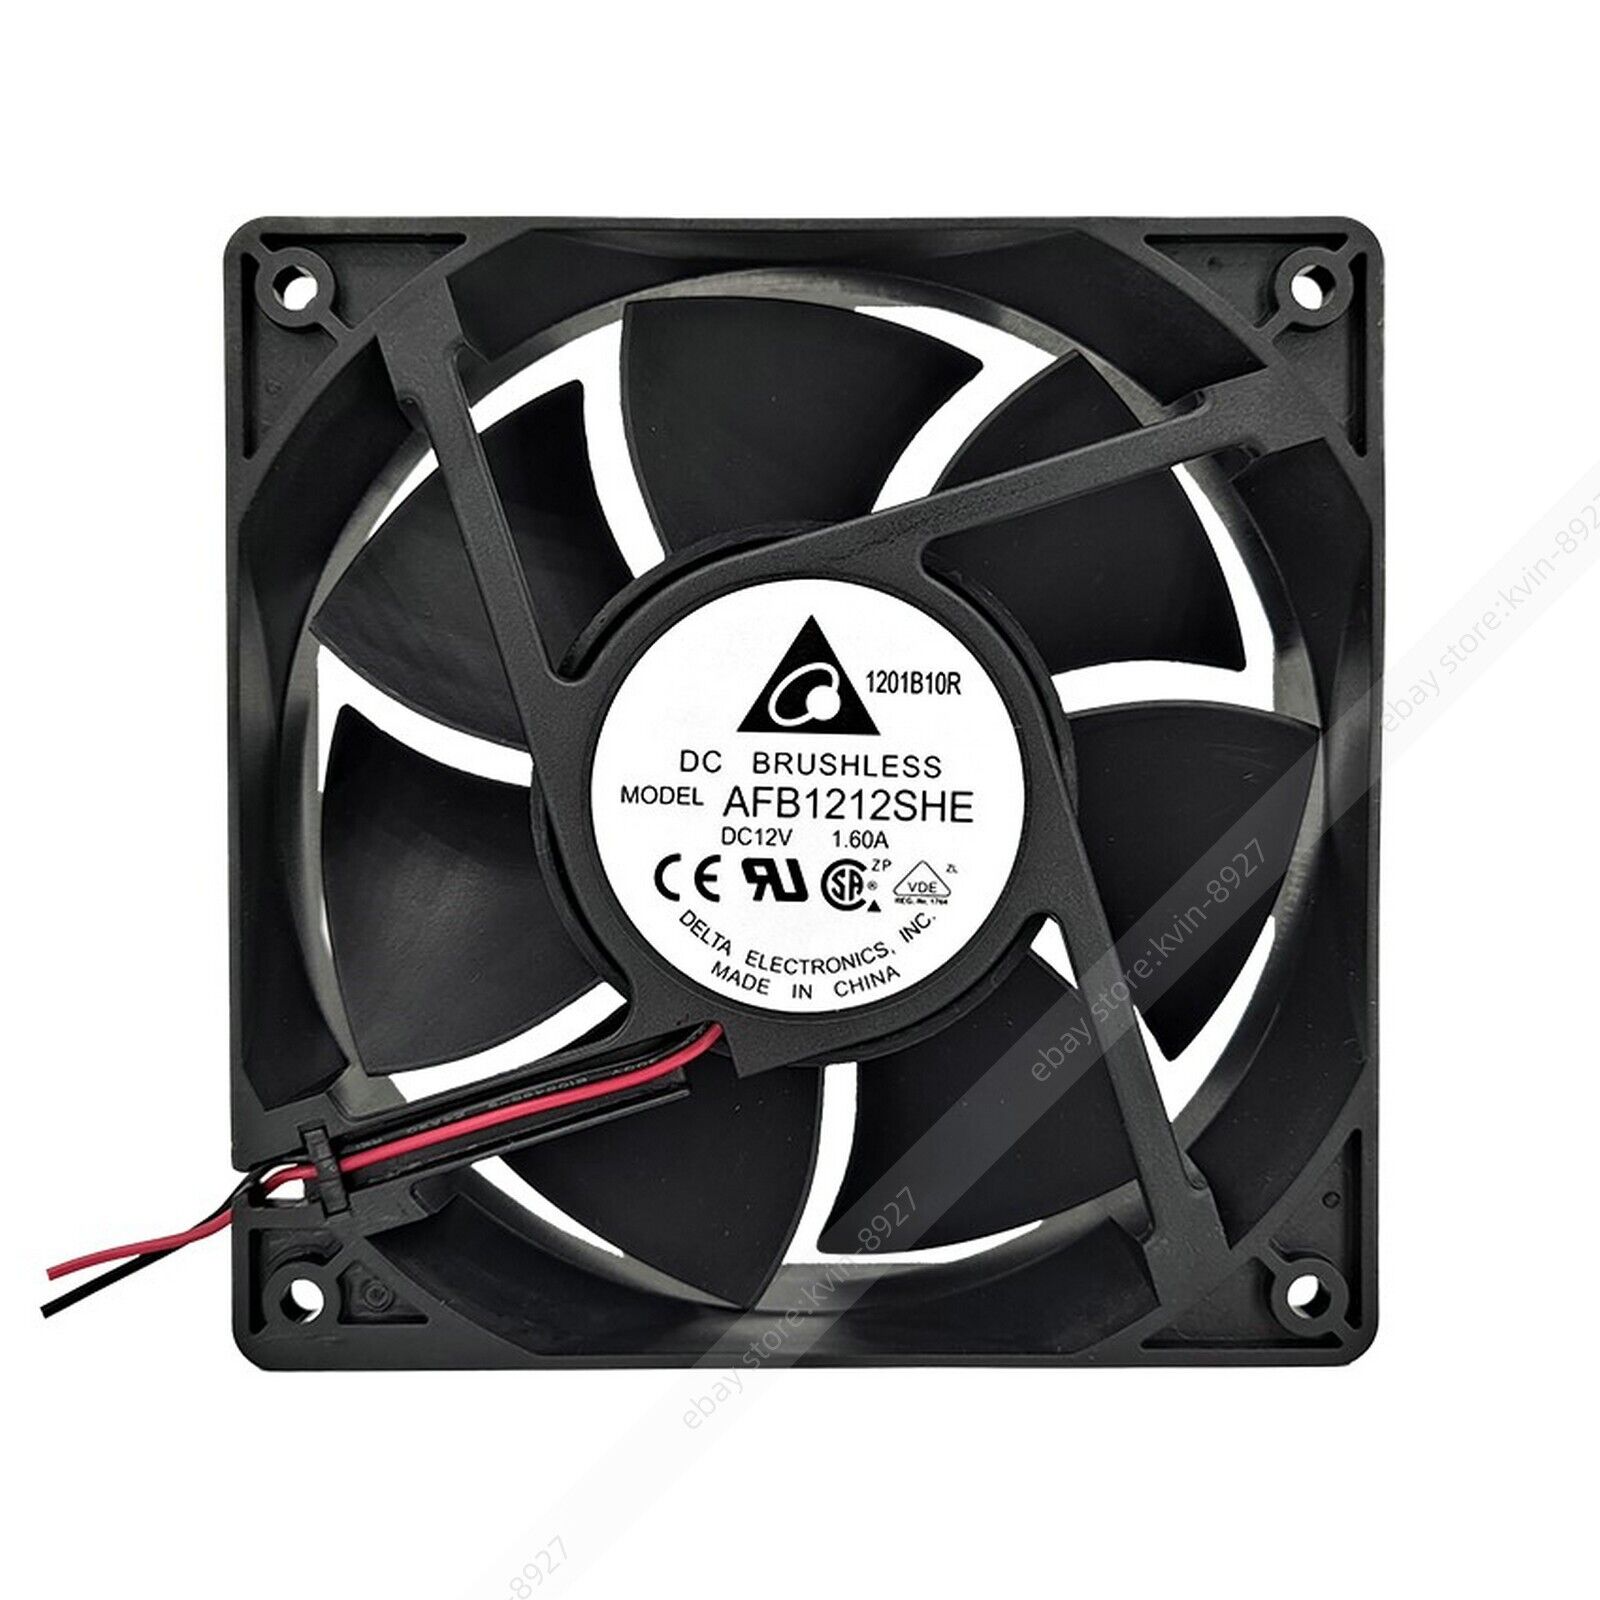 1PC DELTA AFB1212SHE DC12V 1.6A 12mm 3700rpm 2-Wire Server Cooling Fan